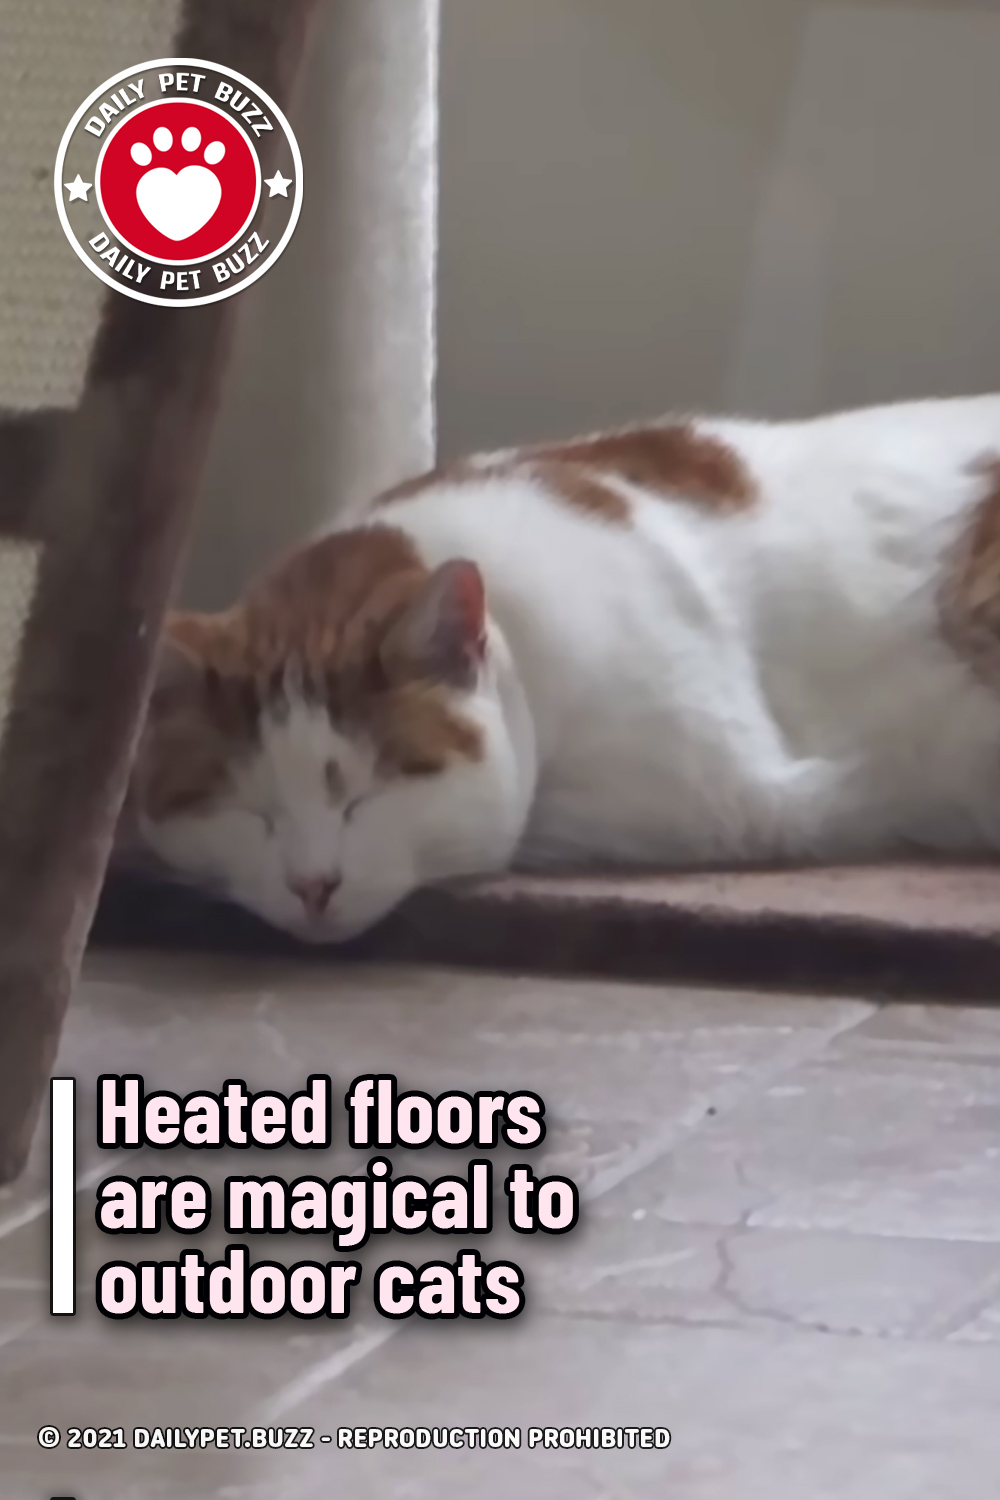 Heated floors are magical to outdoor cats